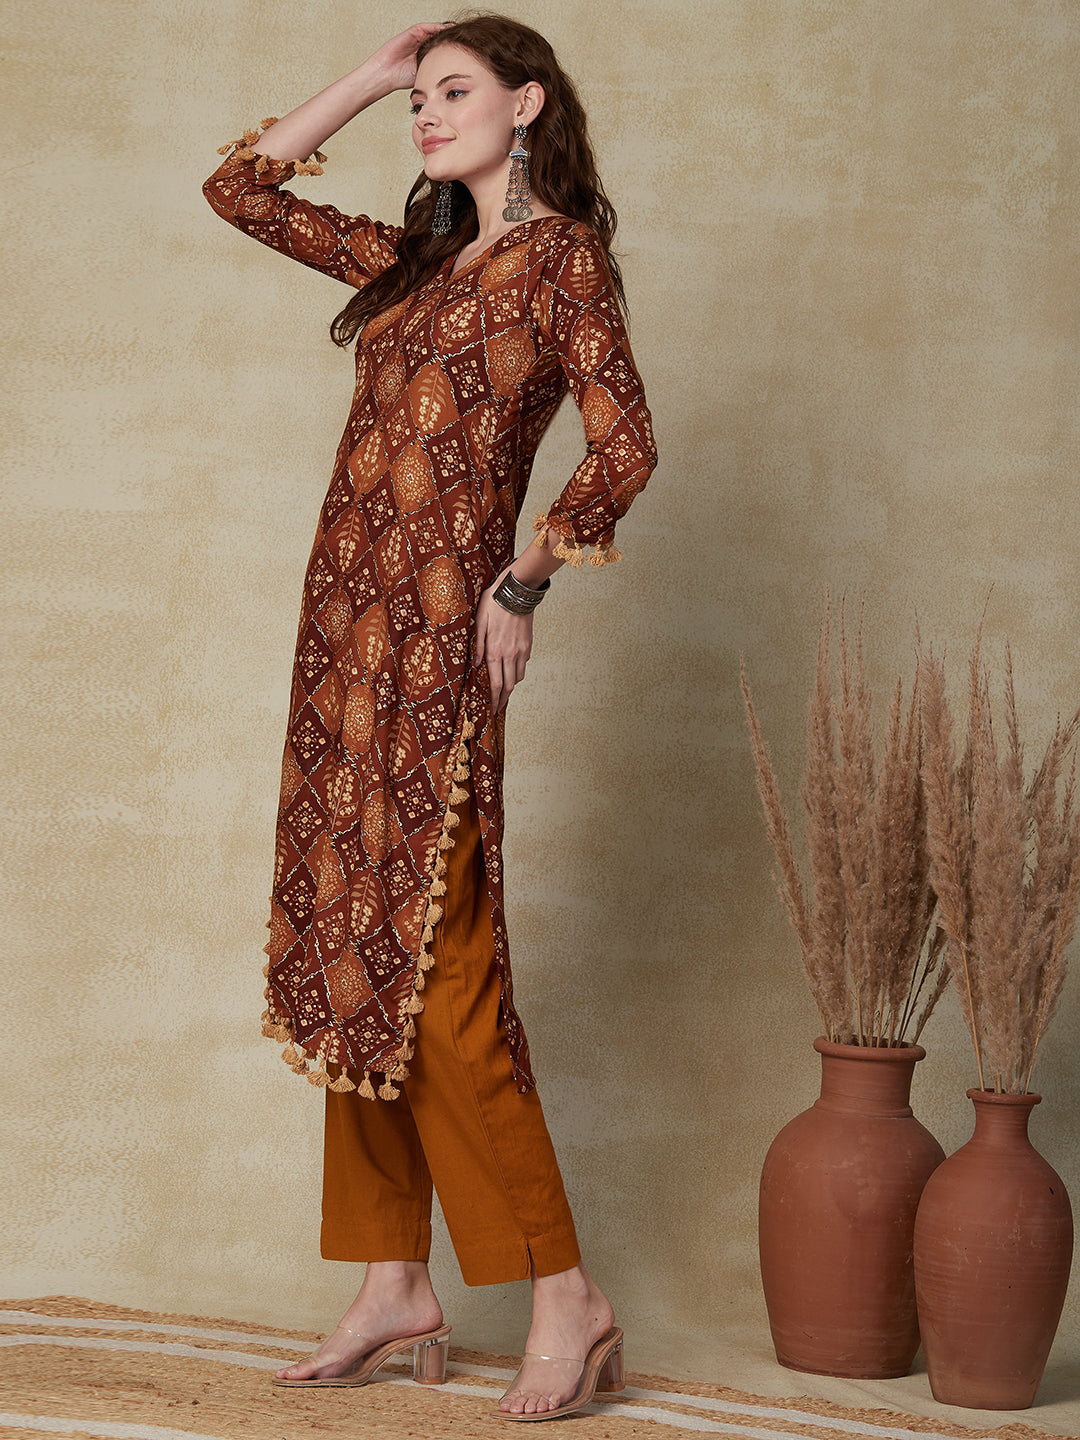 Abstract & Floral Printed Fringed Tassels Lace Embellished Kurta - Brown